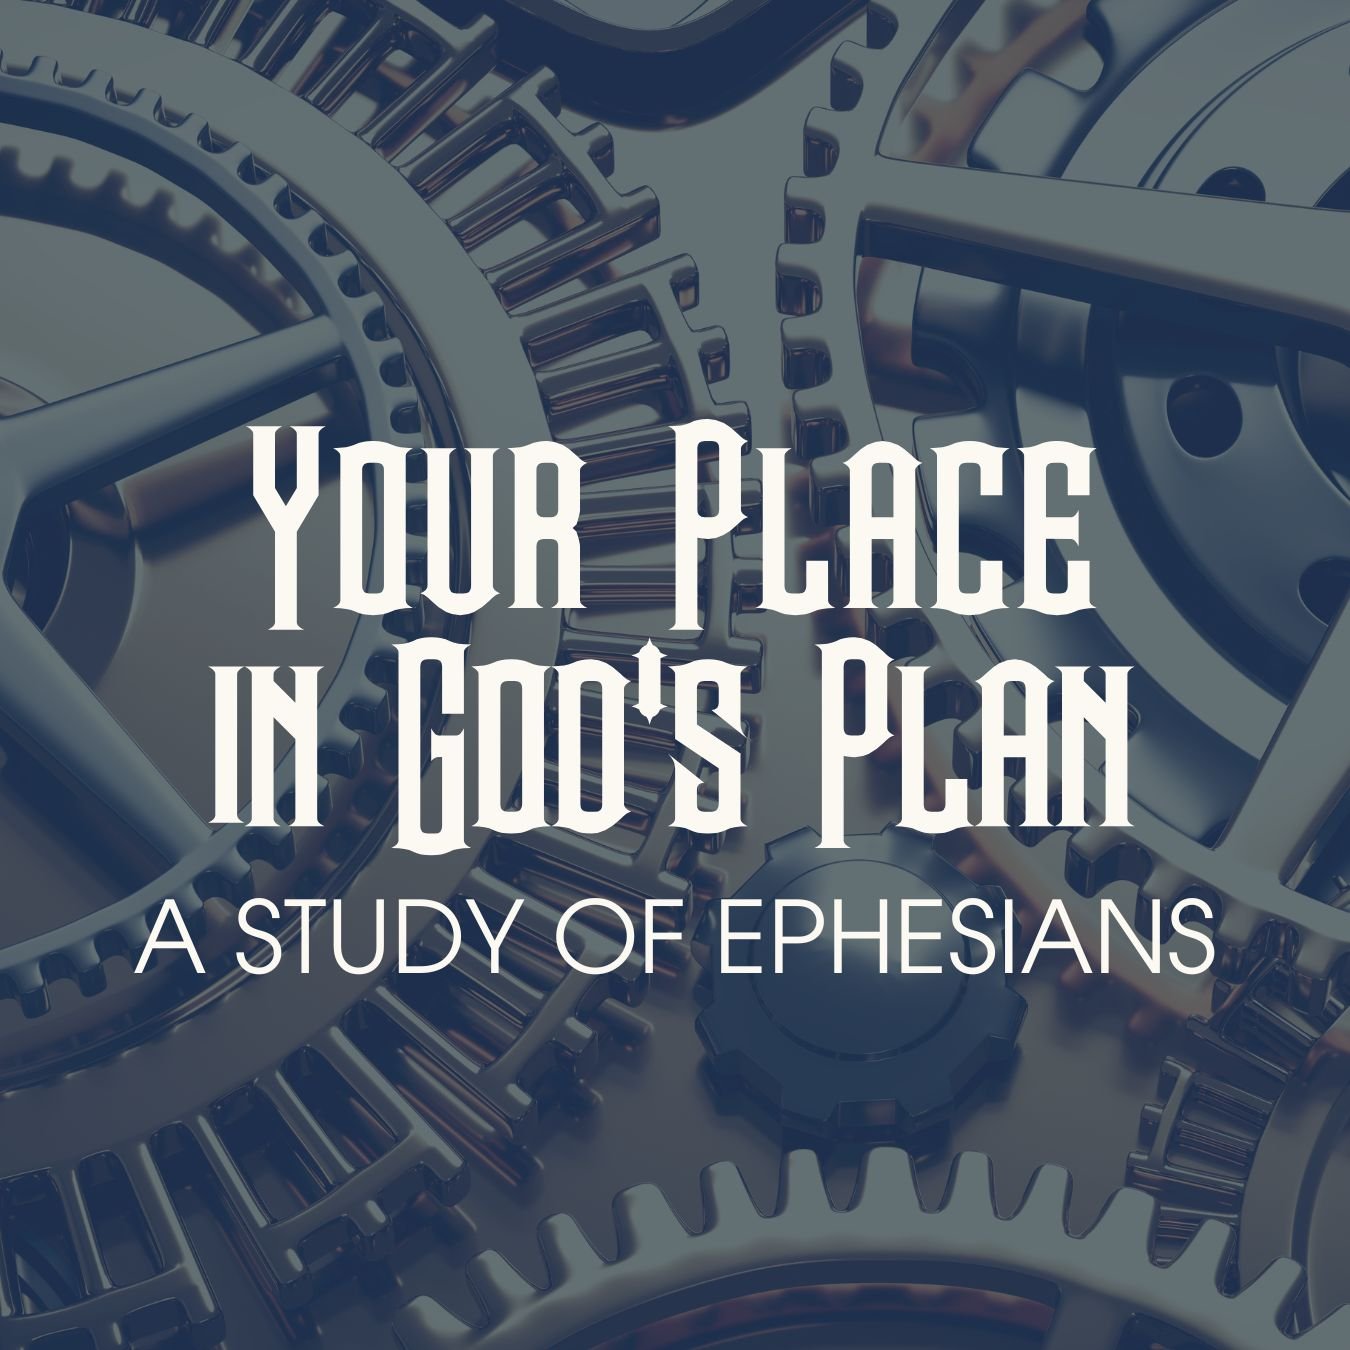 God is doing an immeasurable work in the world. What does he want to unfold in your life? What great work is he doing in you for his greater purpose?

This month we are going through Ephesians and Colin is challenging each of us to start reading thro